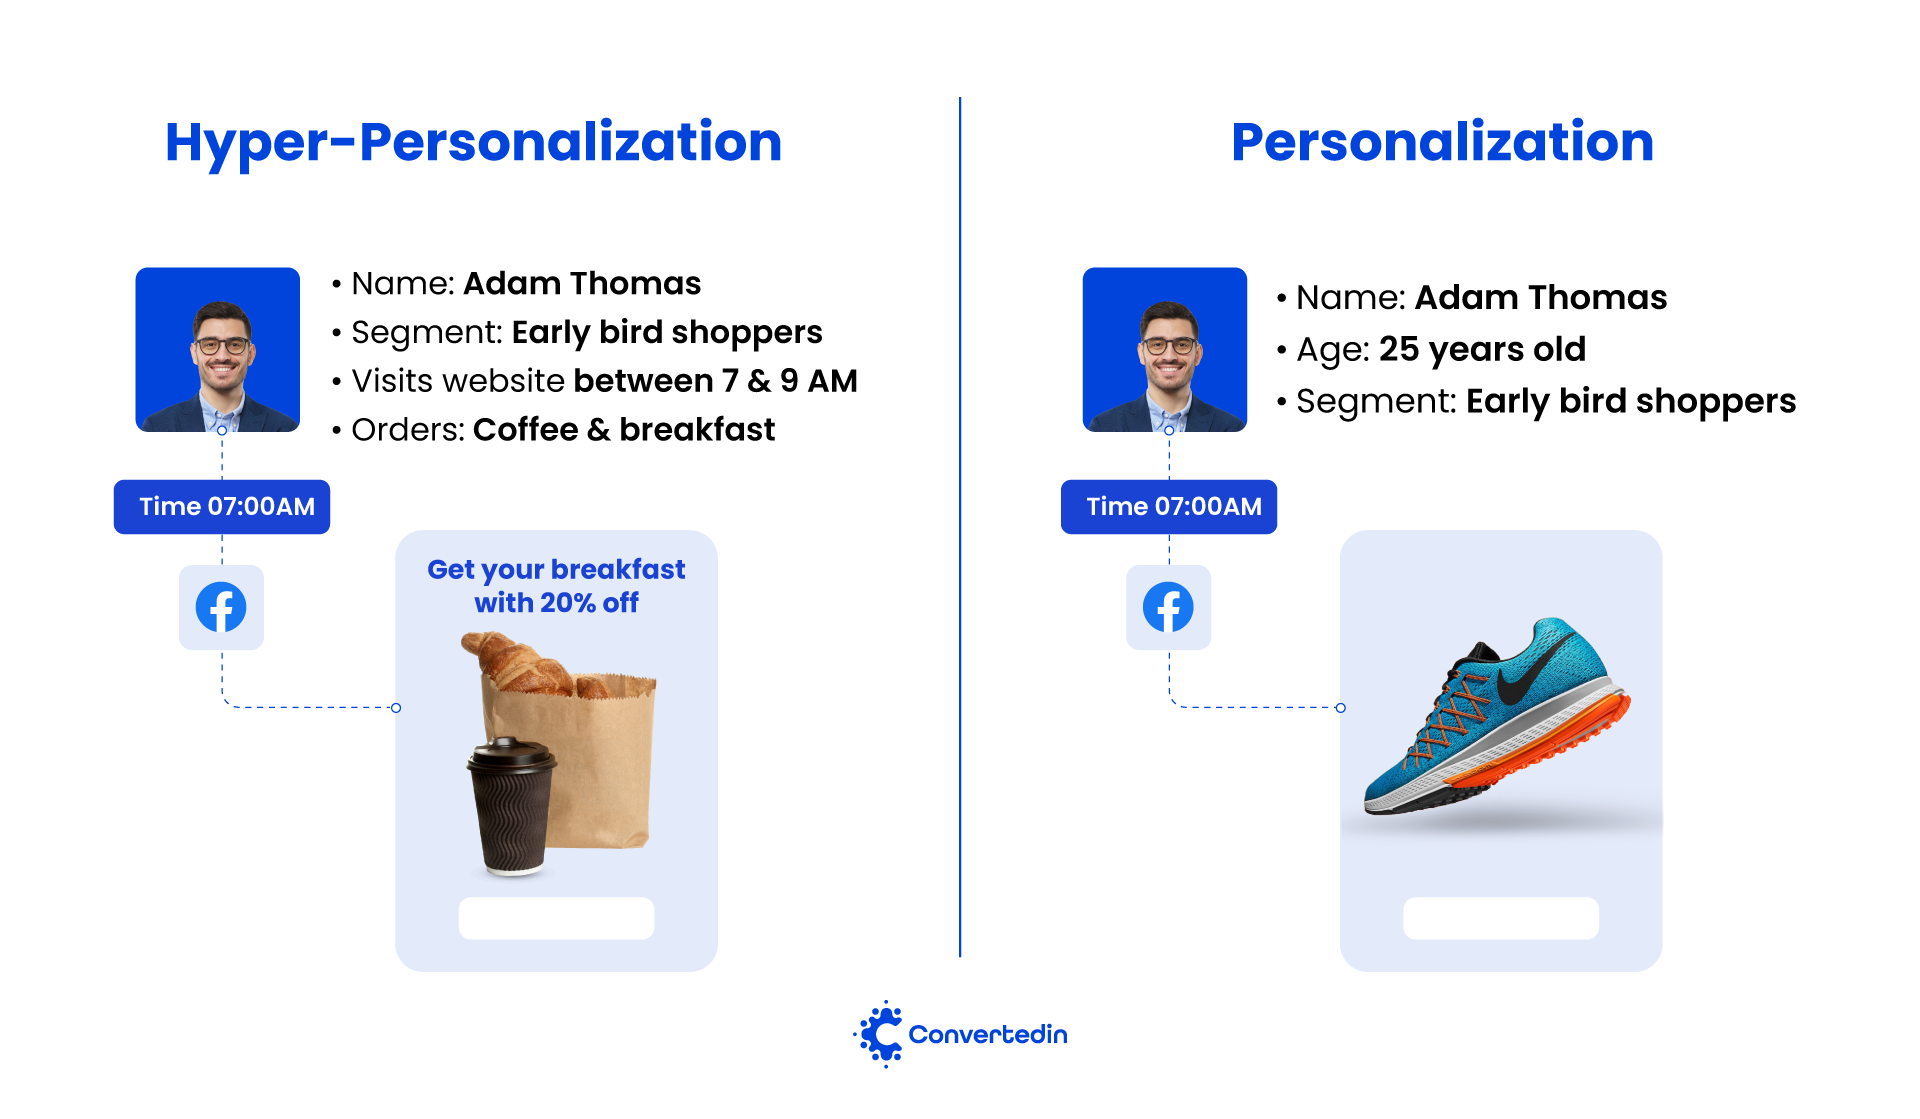 Difference Between Personalization & Hyper-Personalization